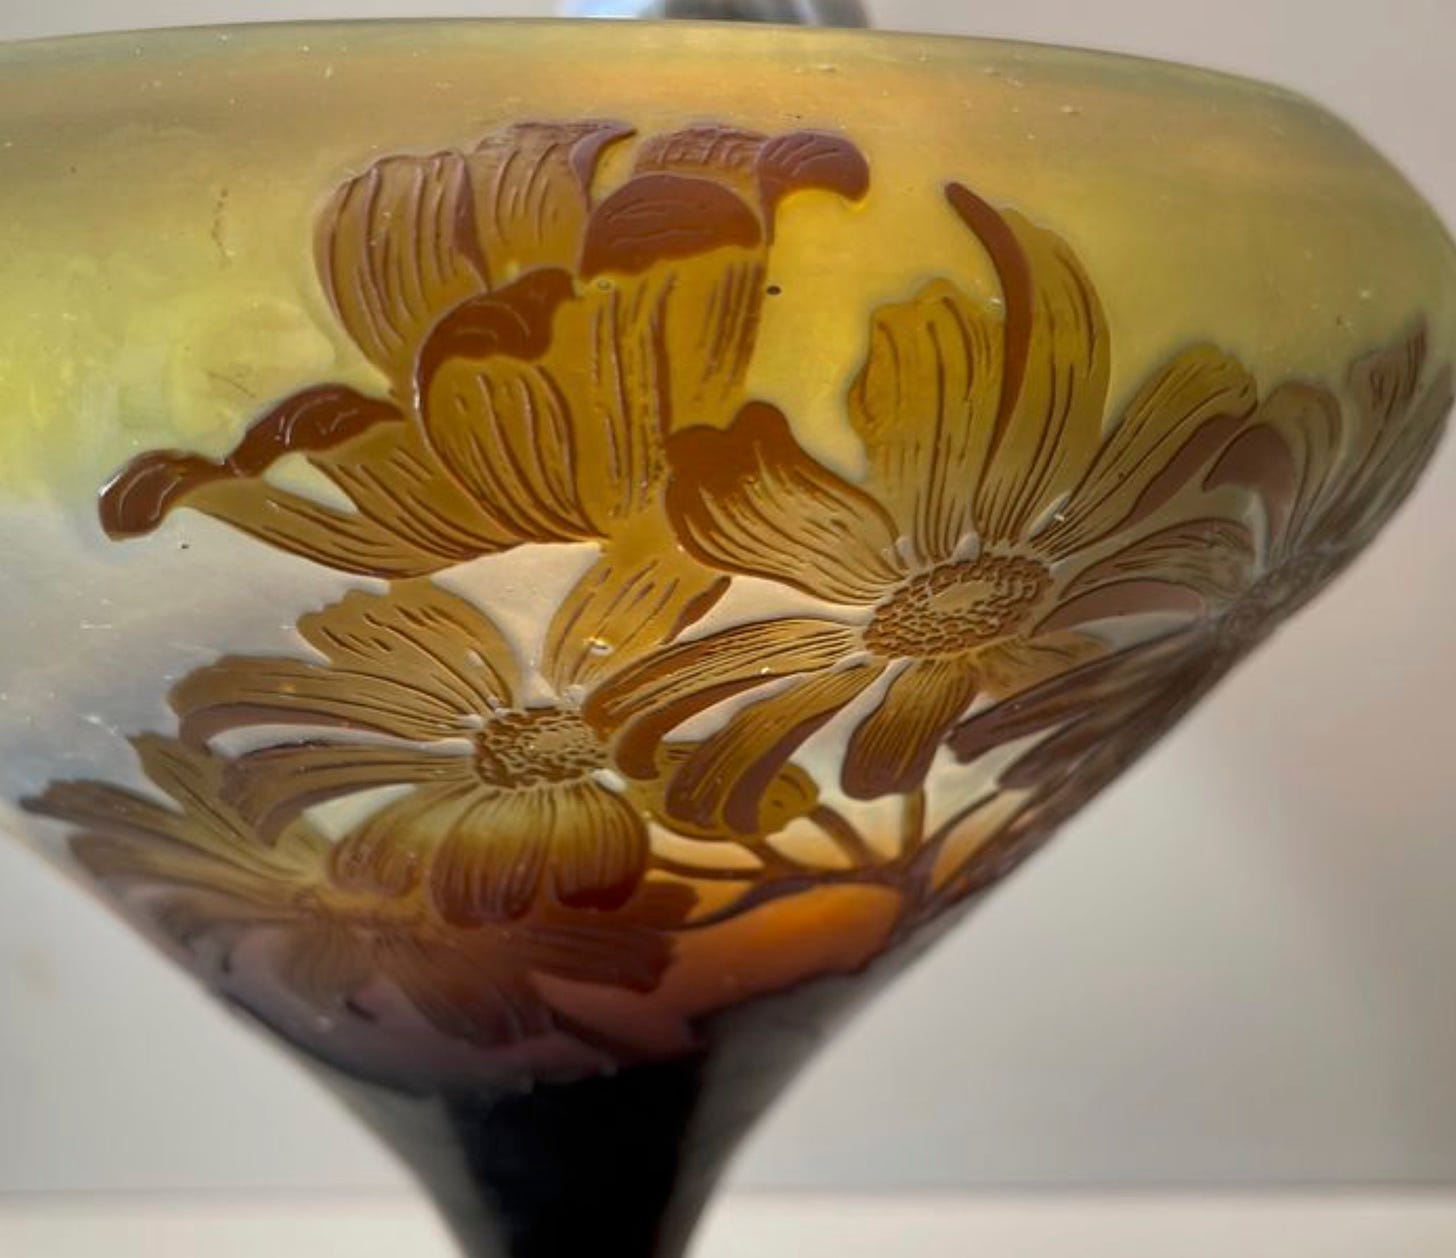 Glass defects on the Fleury cineraria cup. © Catawiki 2021.